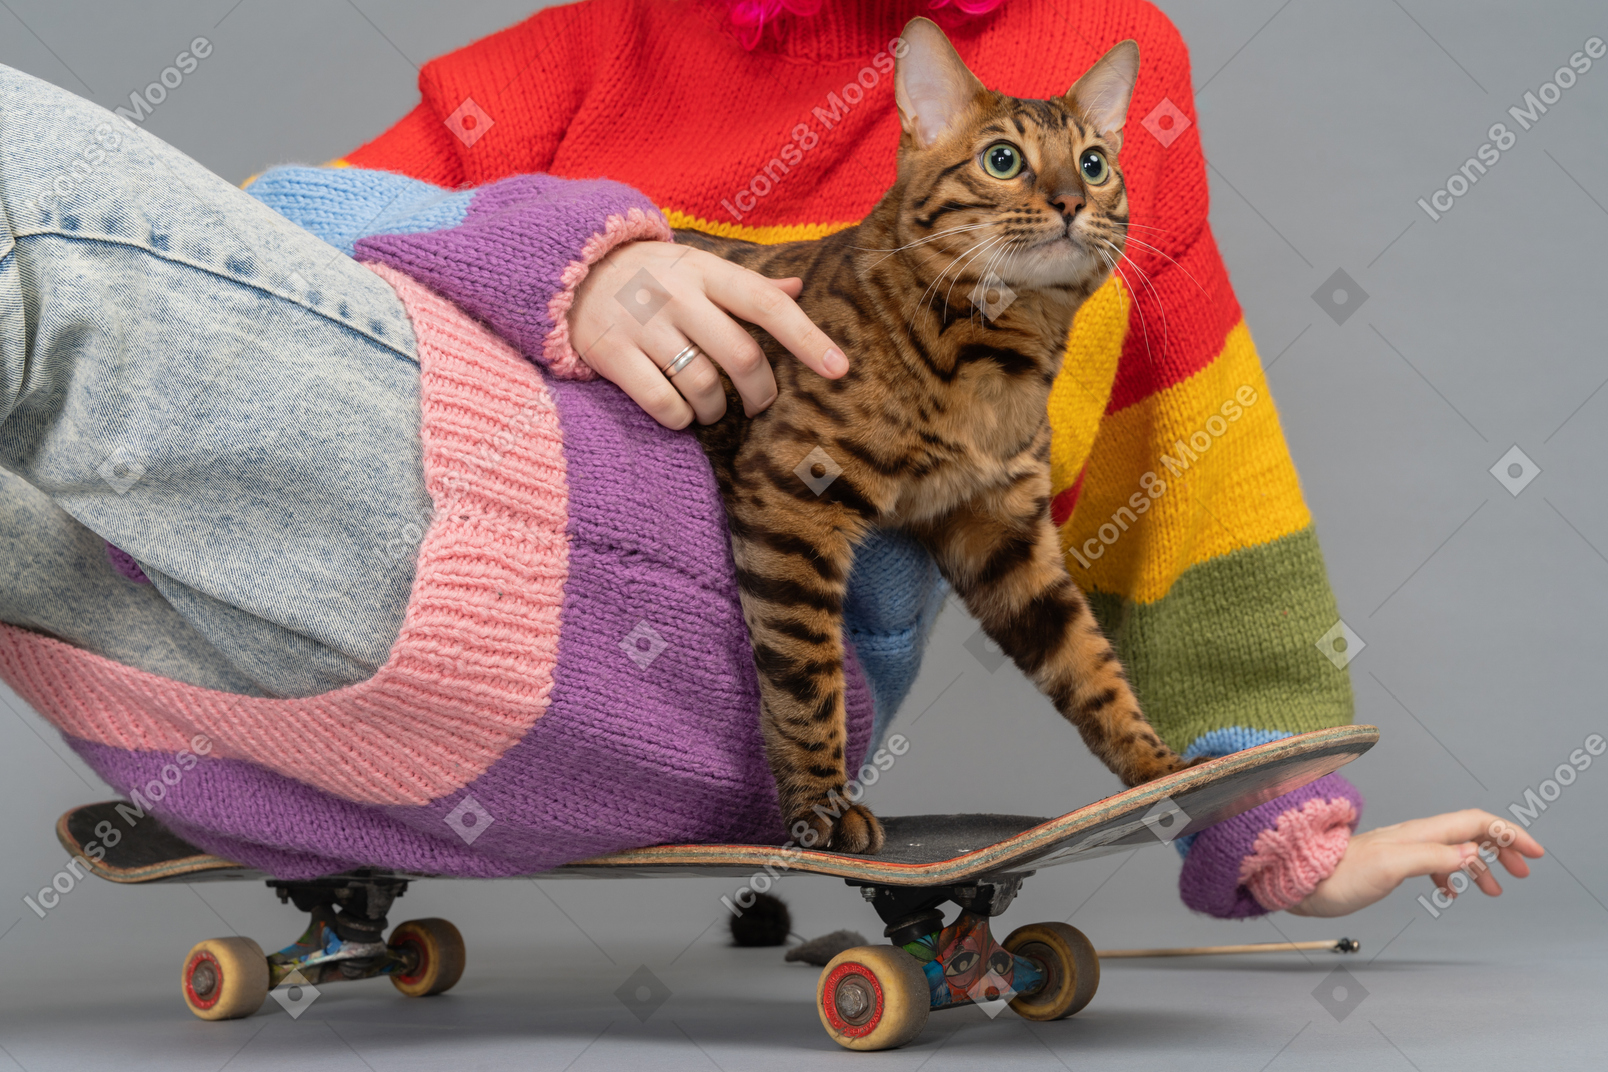 A girl and a cat sitting on a skateboard